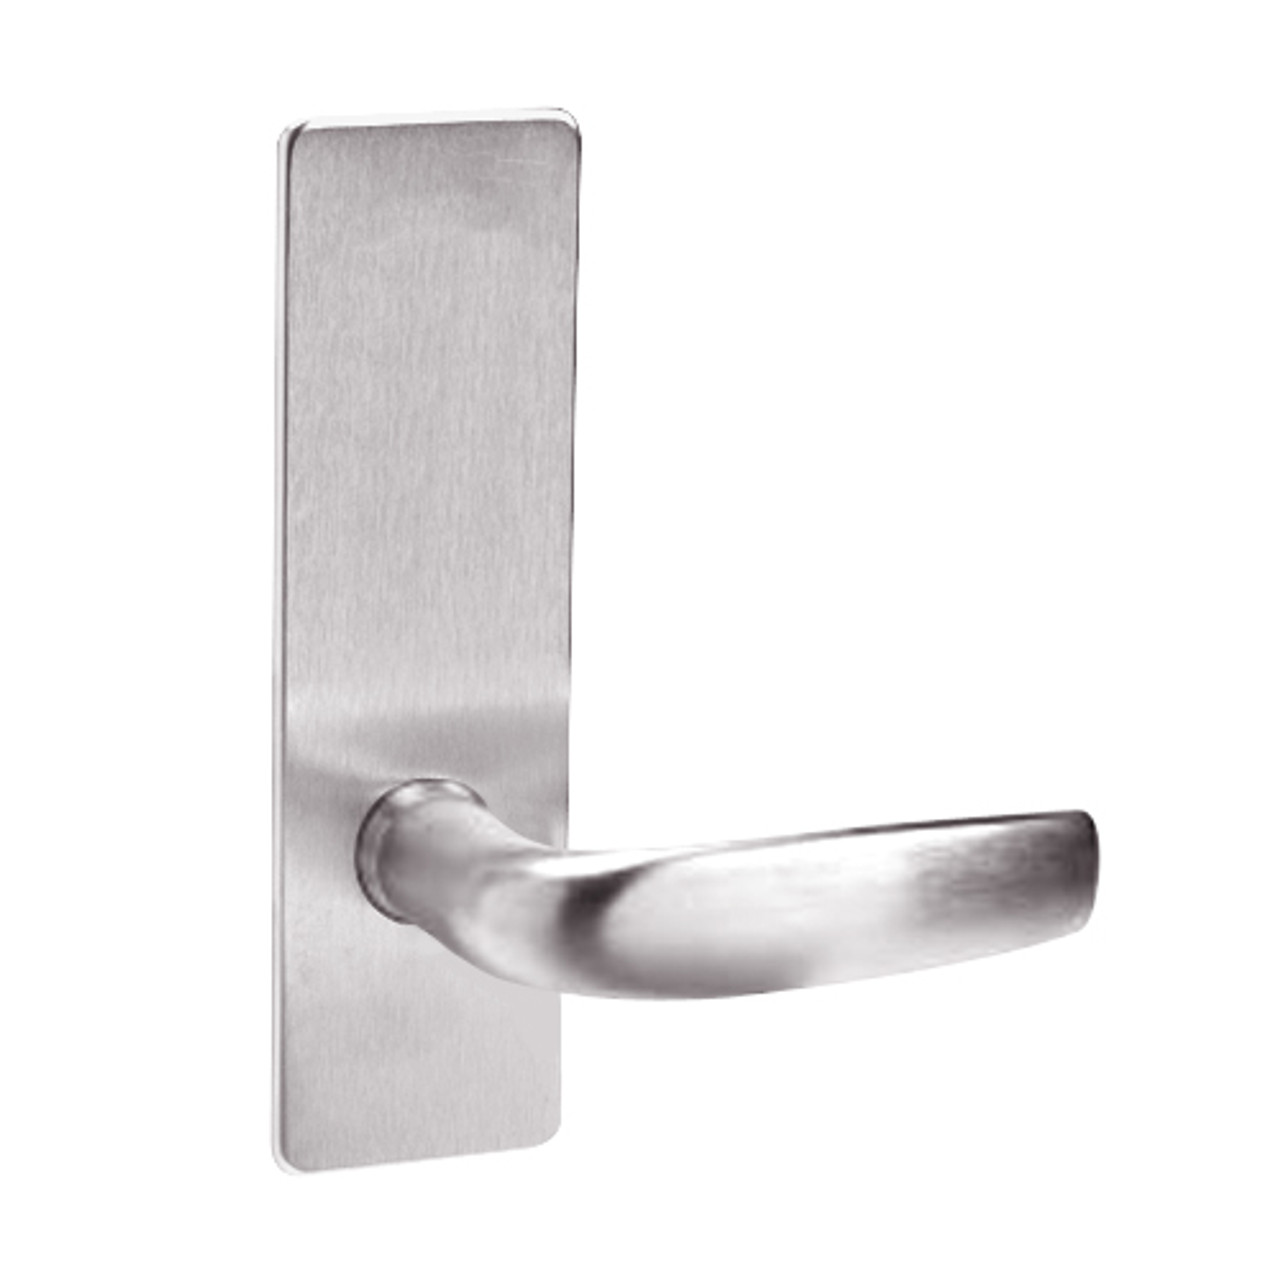 ML2010-CSP-629 Corbin Russwin ML2000 Series Mortise Passage Locksets with Citation Lever in Bright Stainless Steel